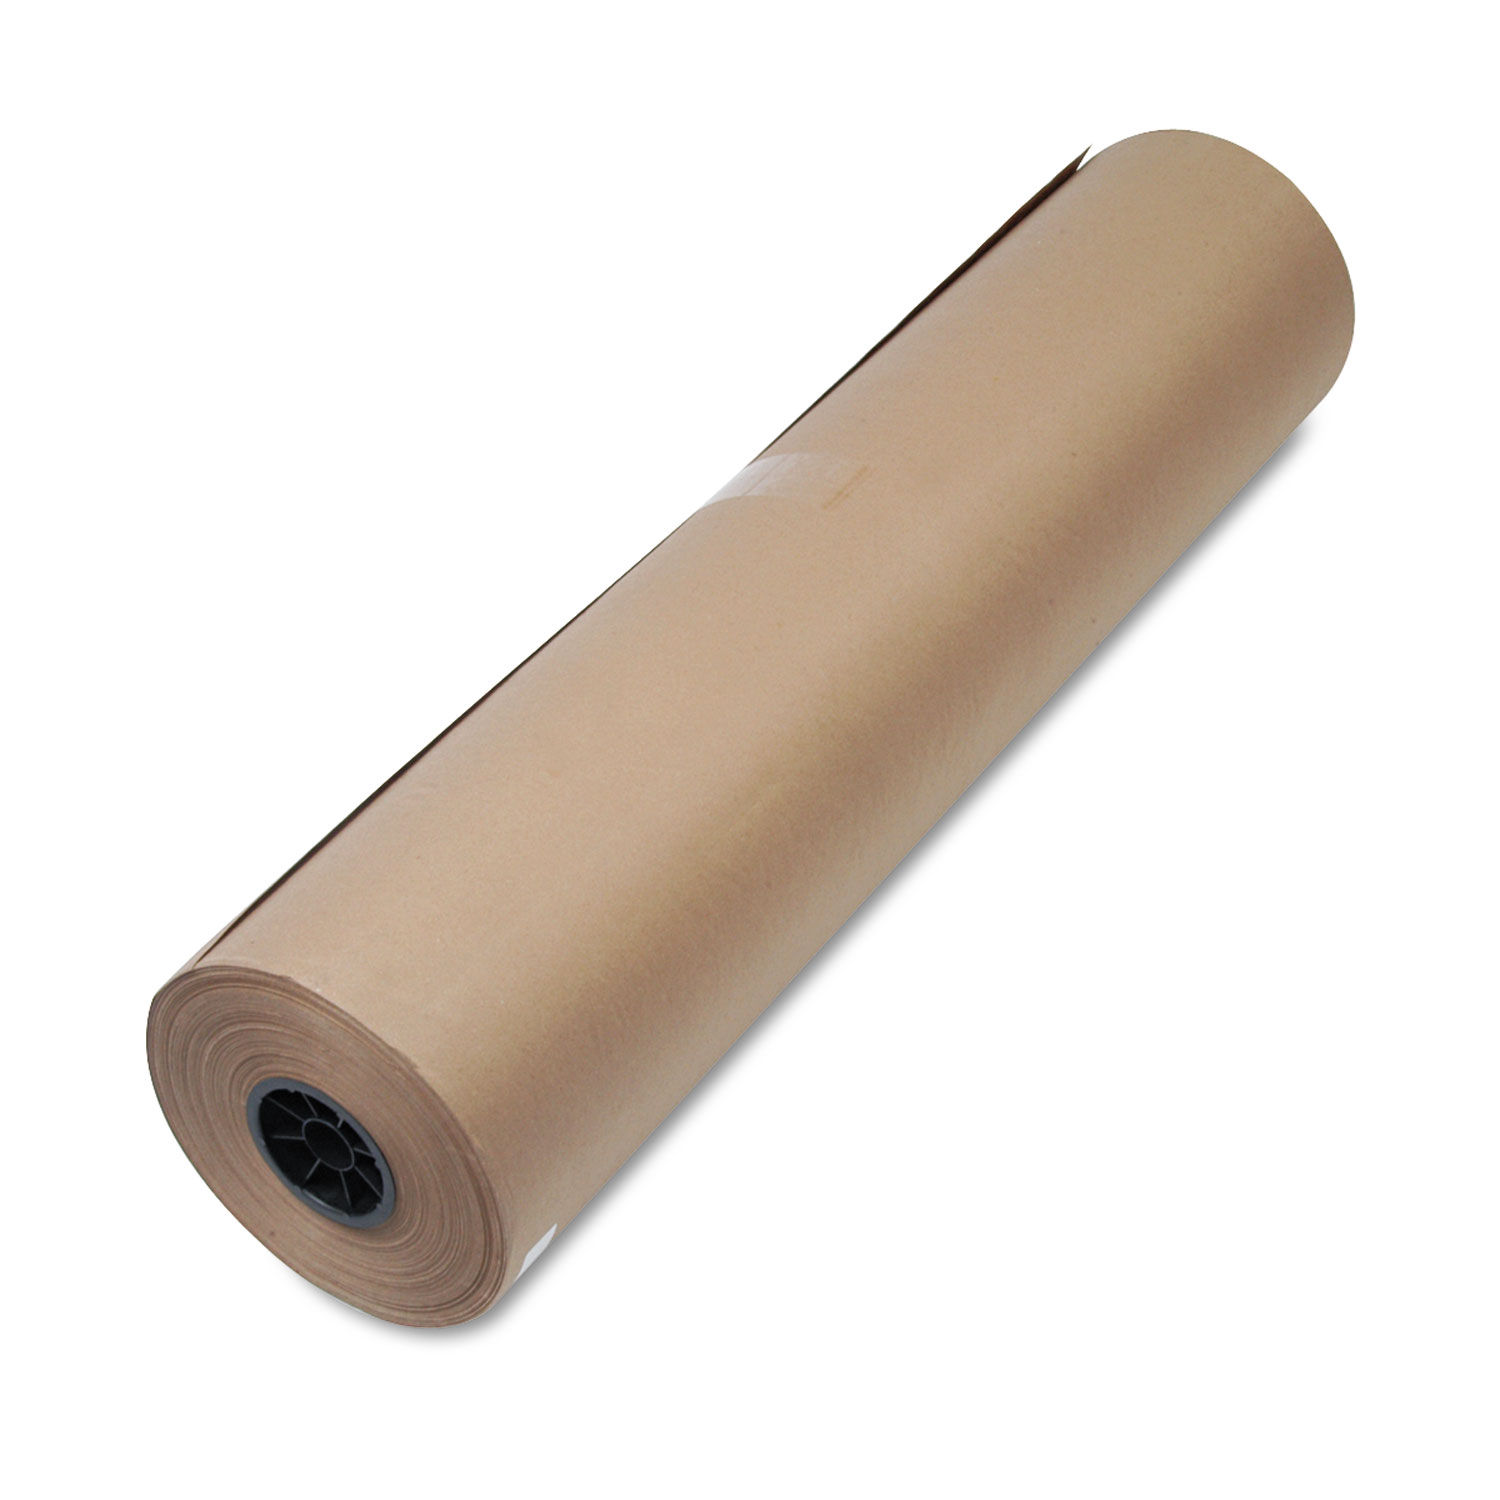 High-Volume Heavyweight Wrapping Paper Roll by Universal® UNV1300053